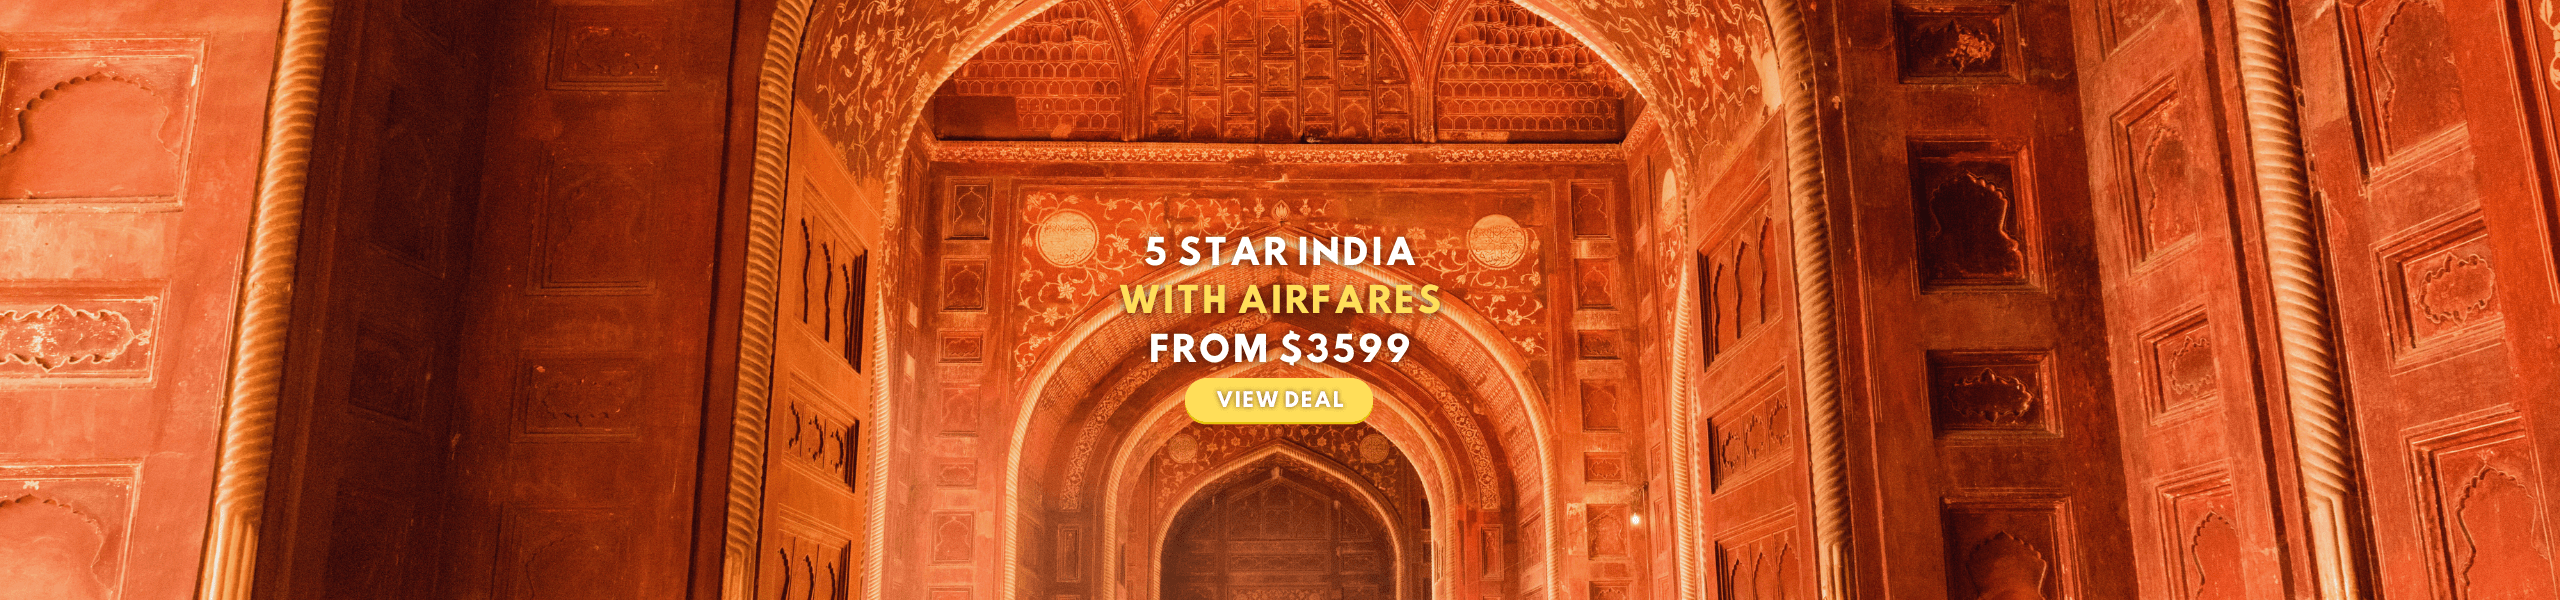 5 Star Tour India With Flights From Australia 